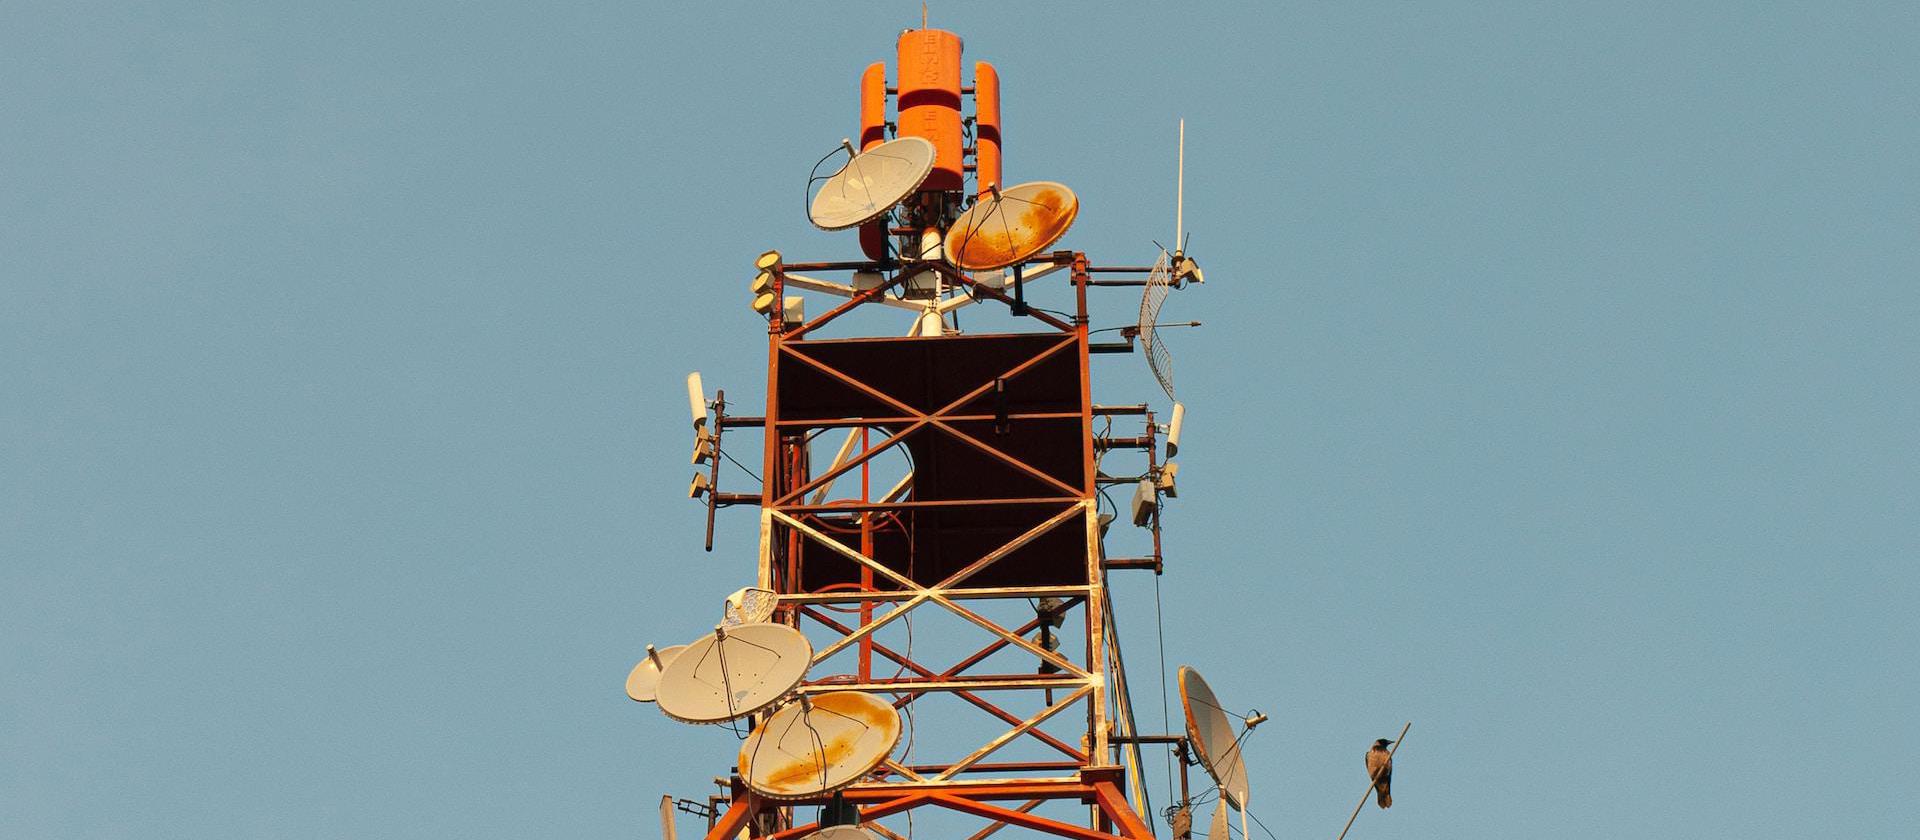 Image of a radio tower.